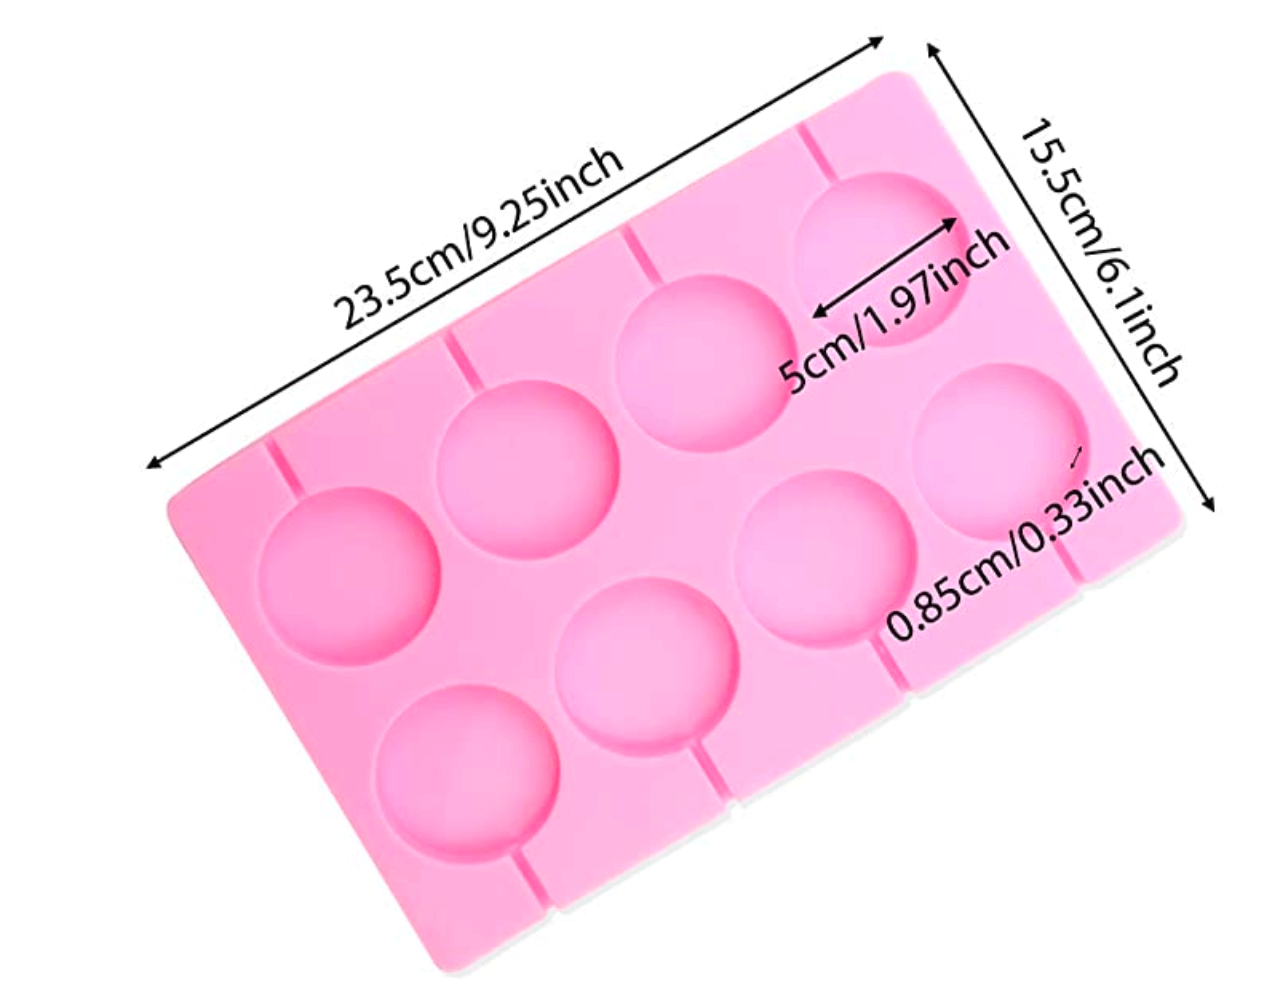 Large Round Cavity Silicone Mold for Lollipops - 8 Cavity 2" (5cm) each - BSUPP024.